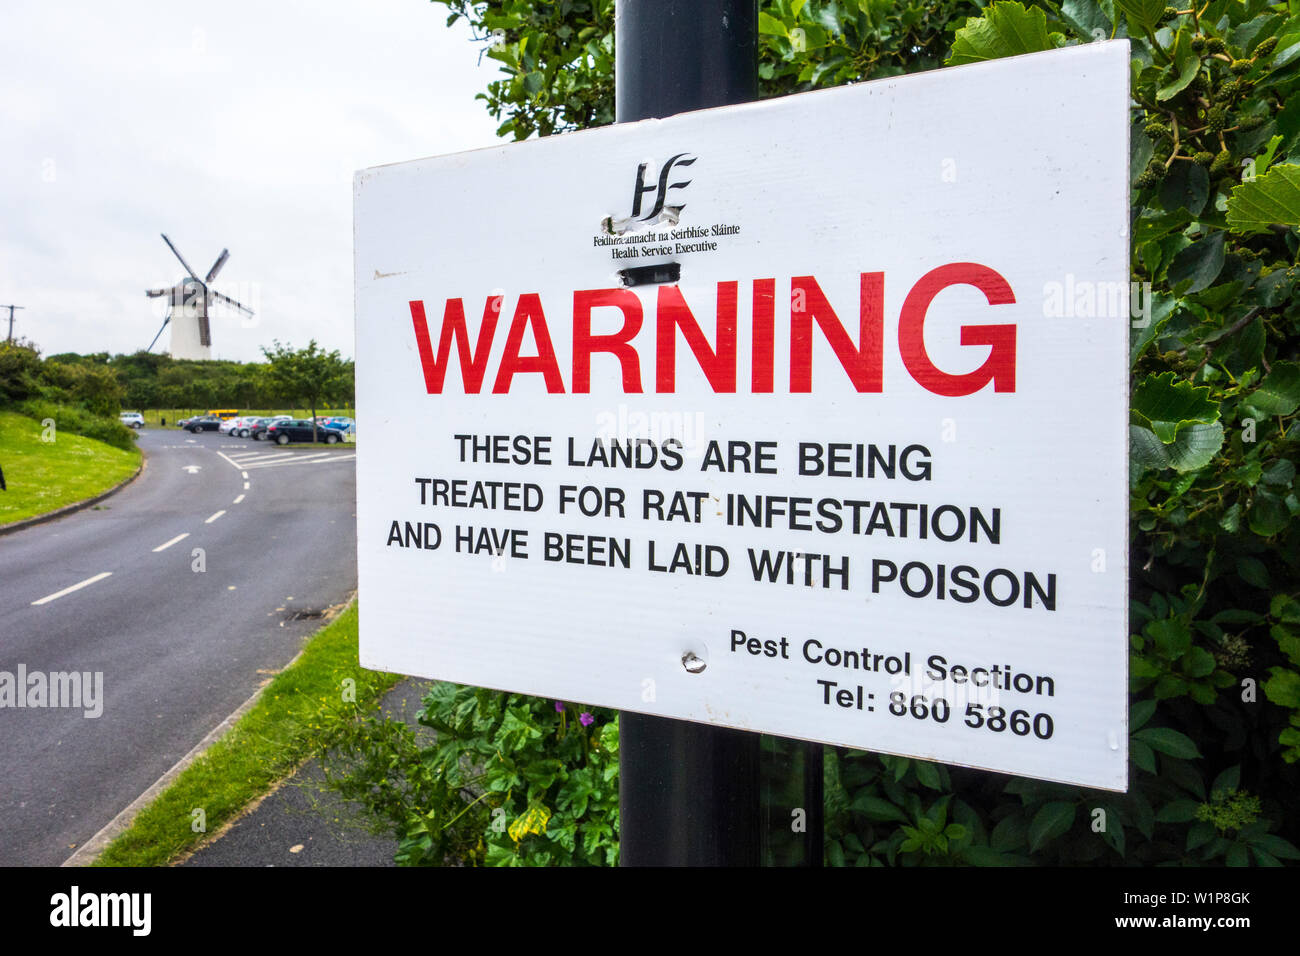 A warning notice in a public park In Skerries, Dublin, Ireland notifying that the land has been laid with poison for rat infestation Stock Photo